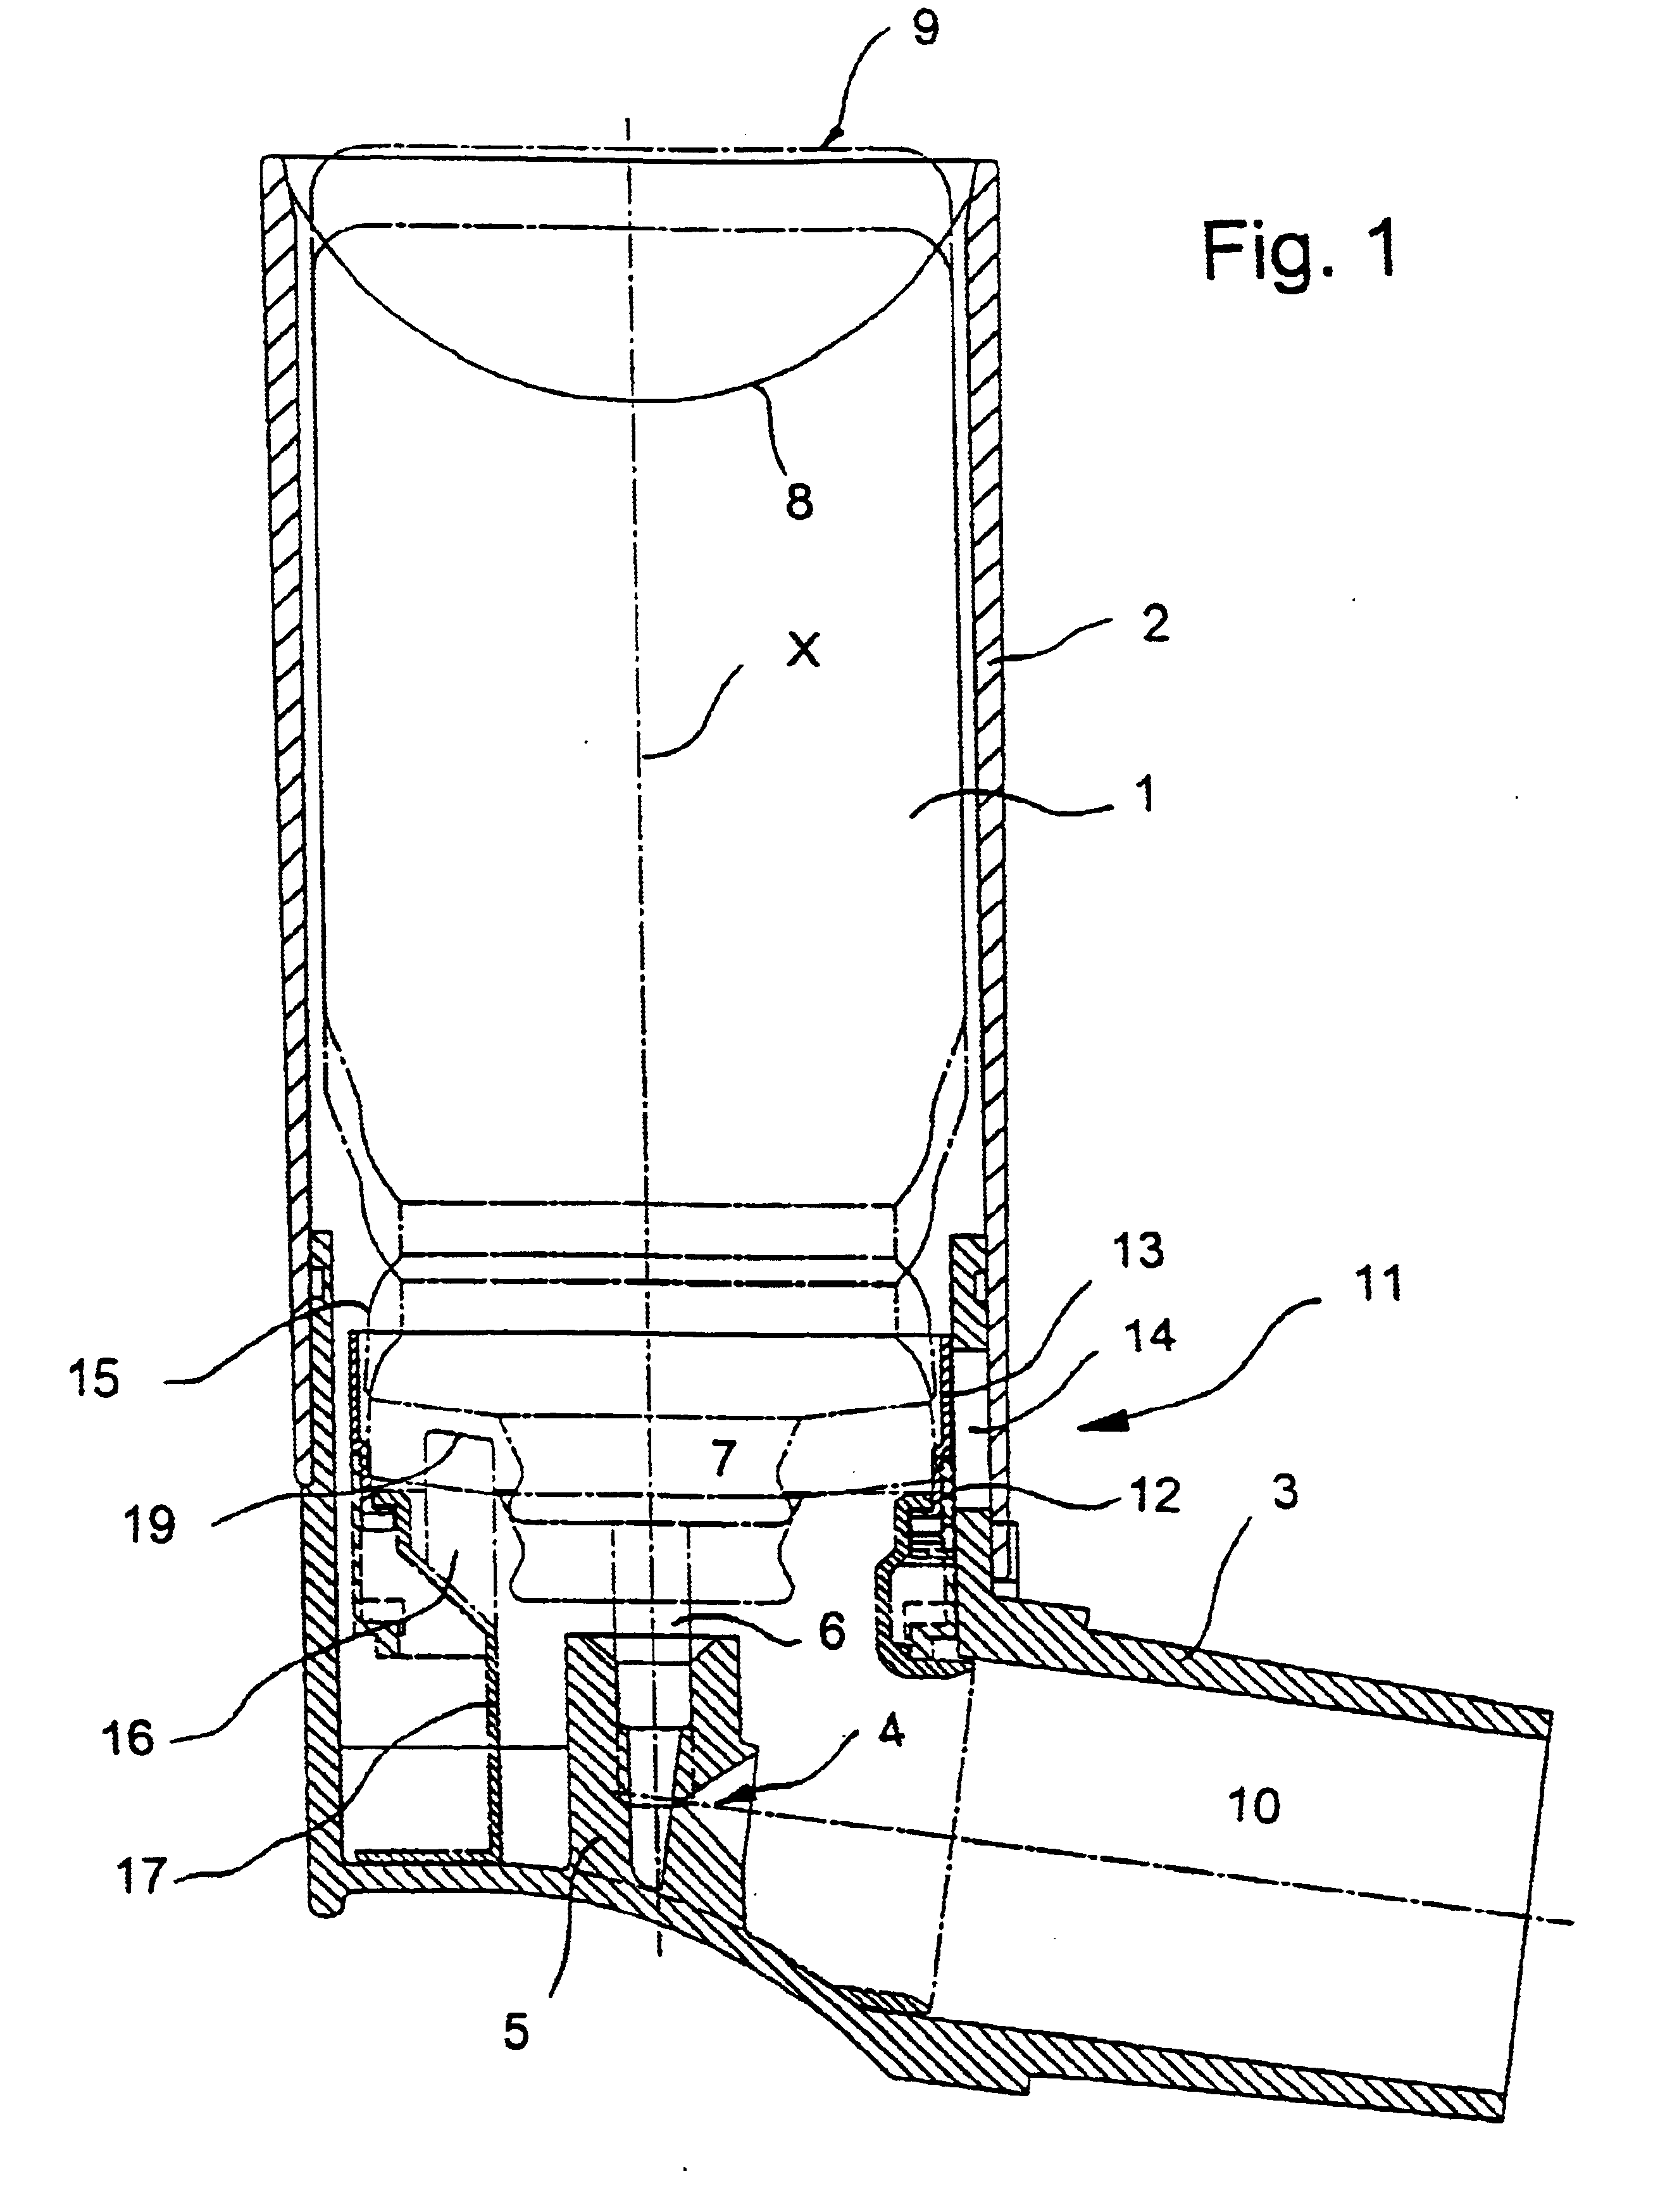 Inhalator comprising a dosage counting device